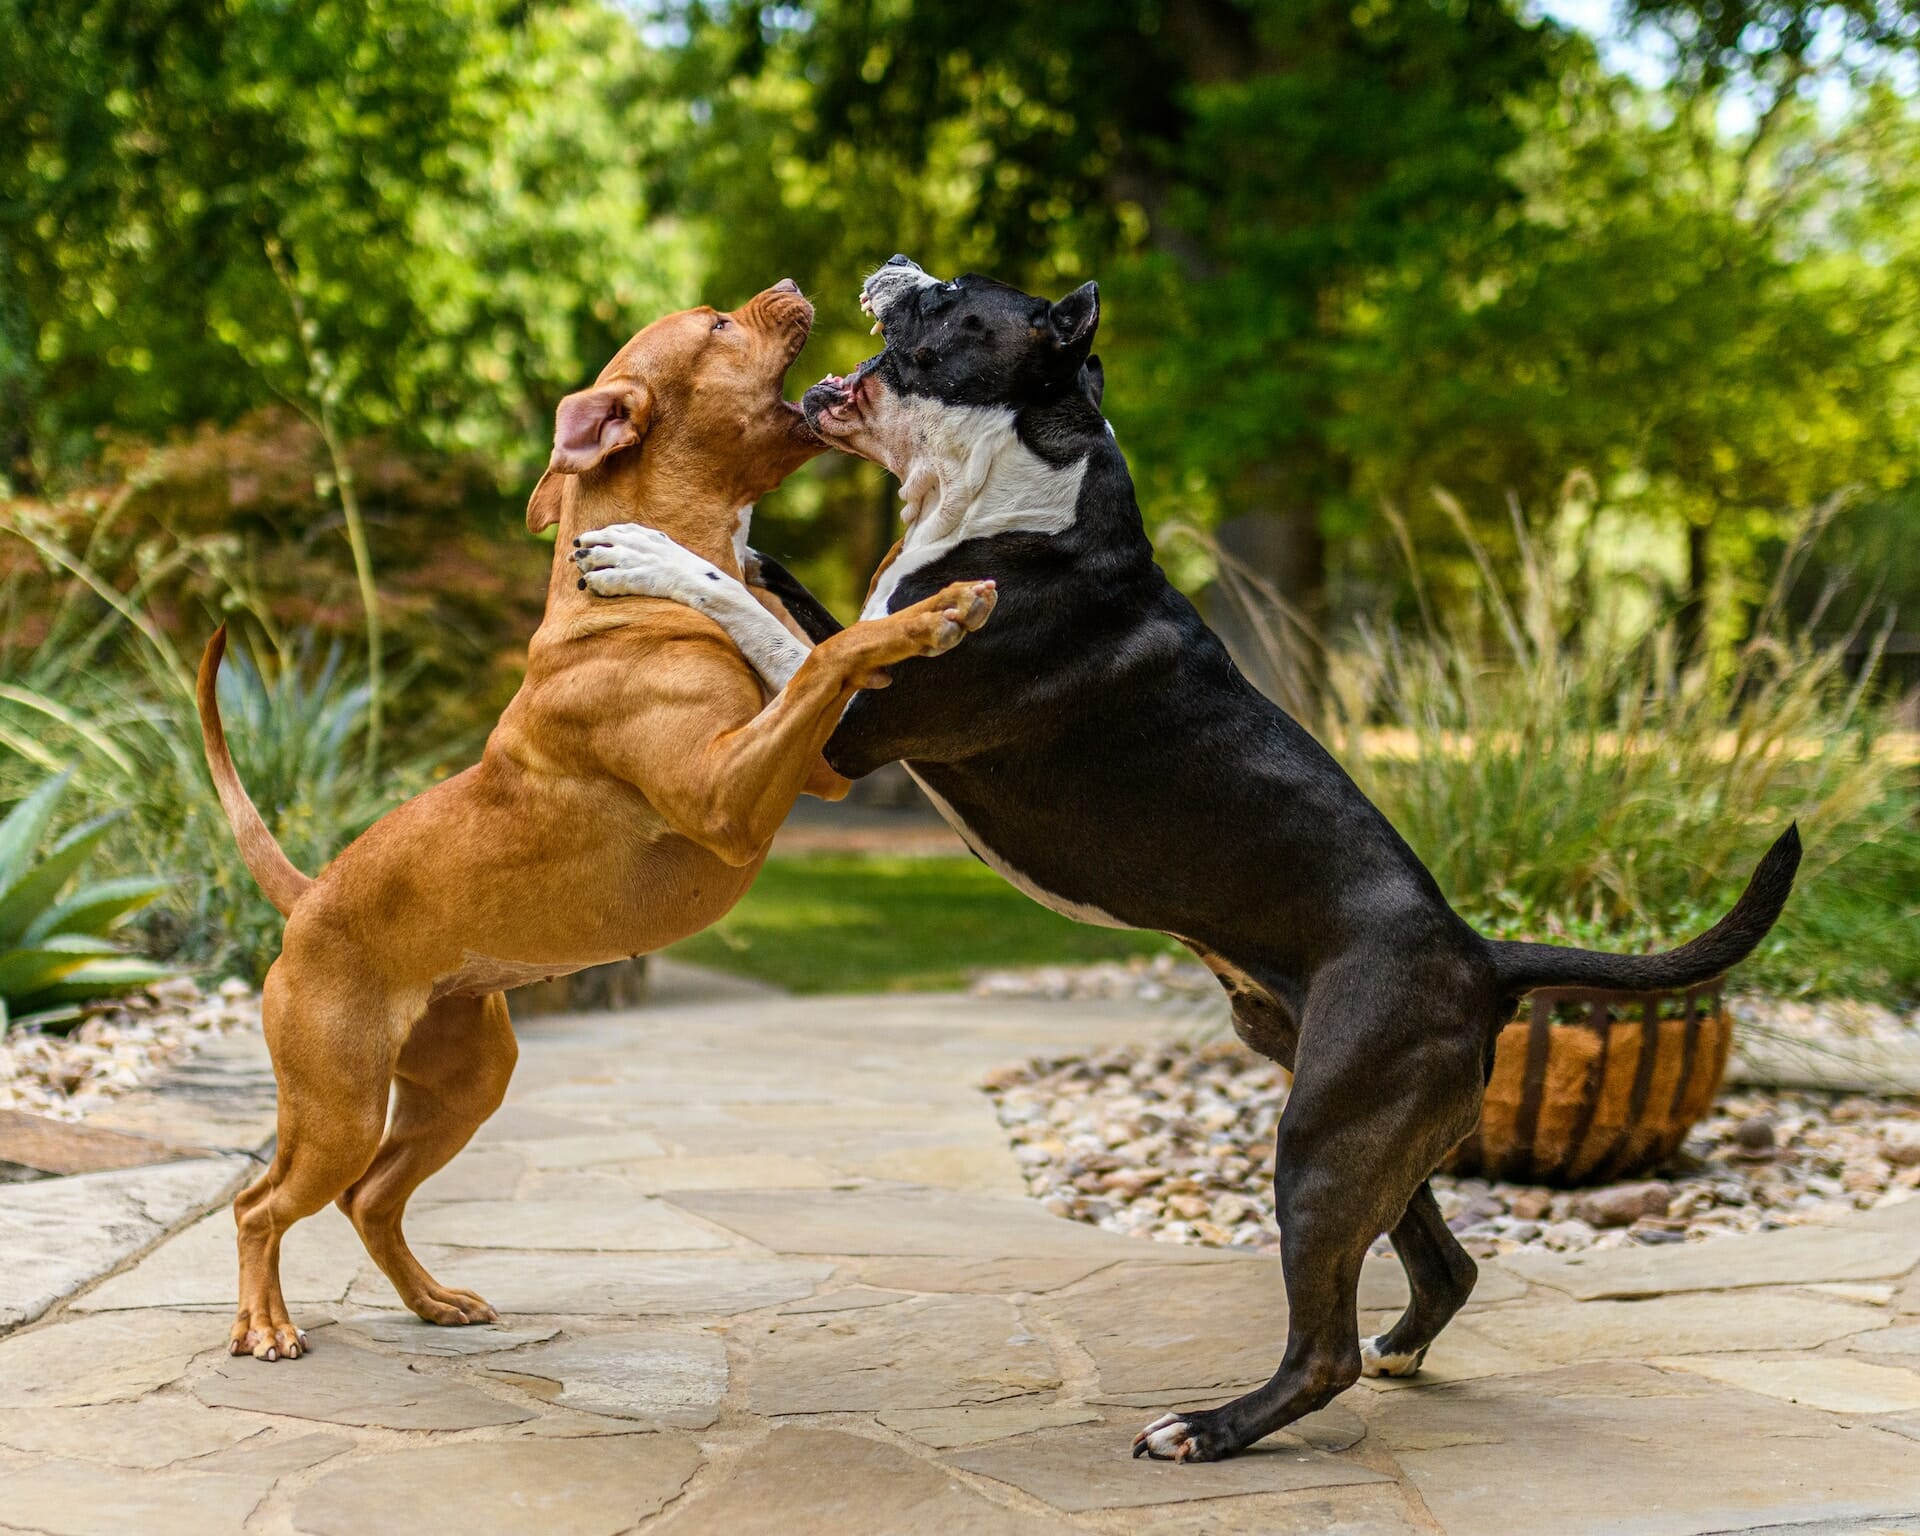 Best Strategy to Deal With Dominance Aggression in Dogs